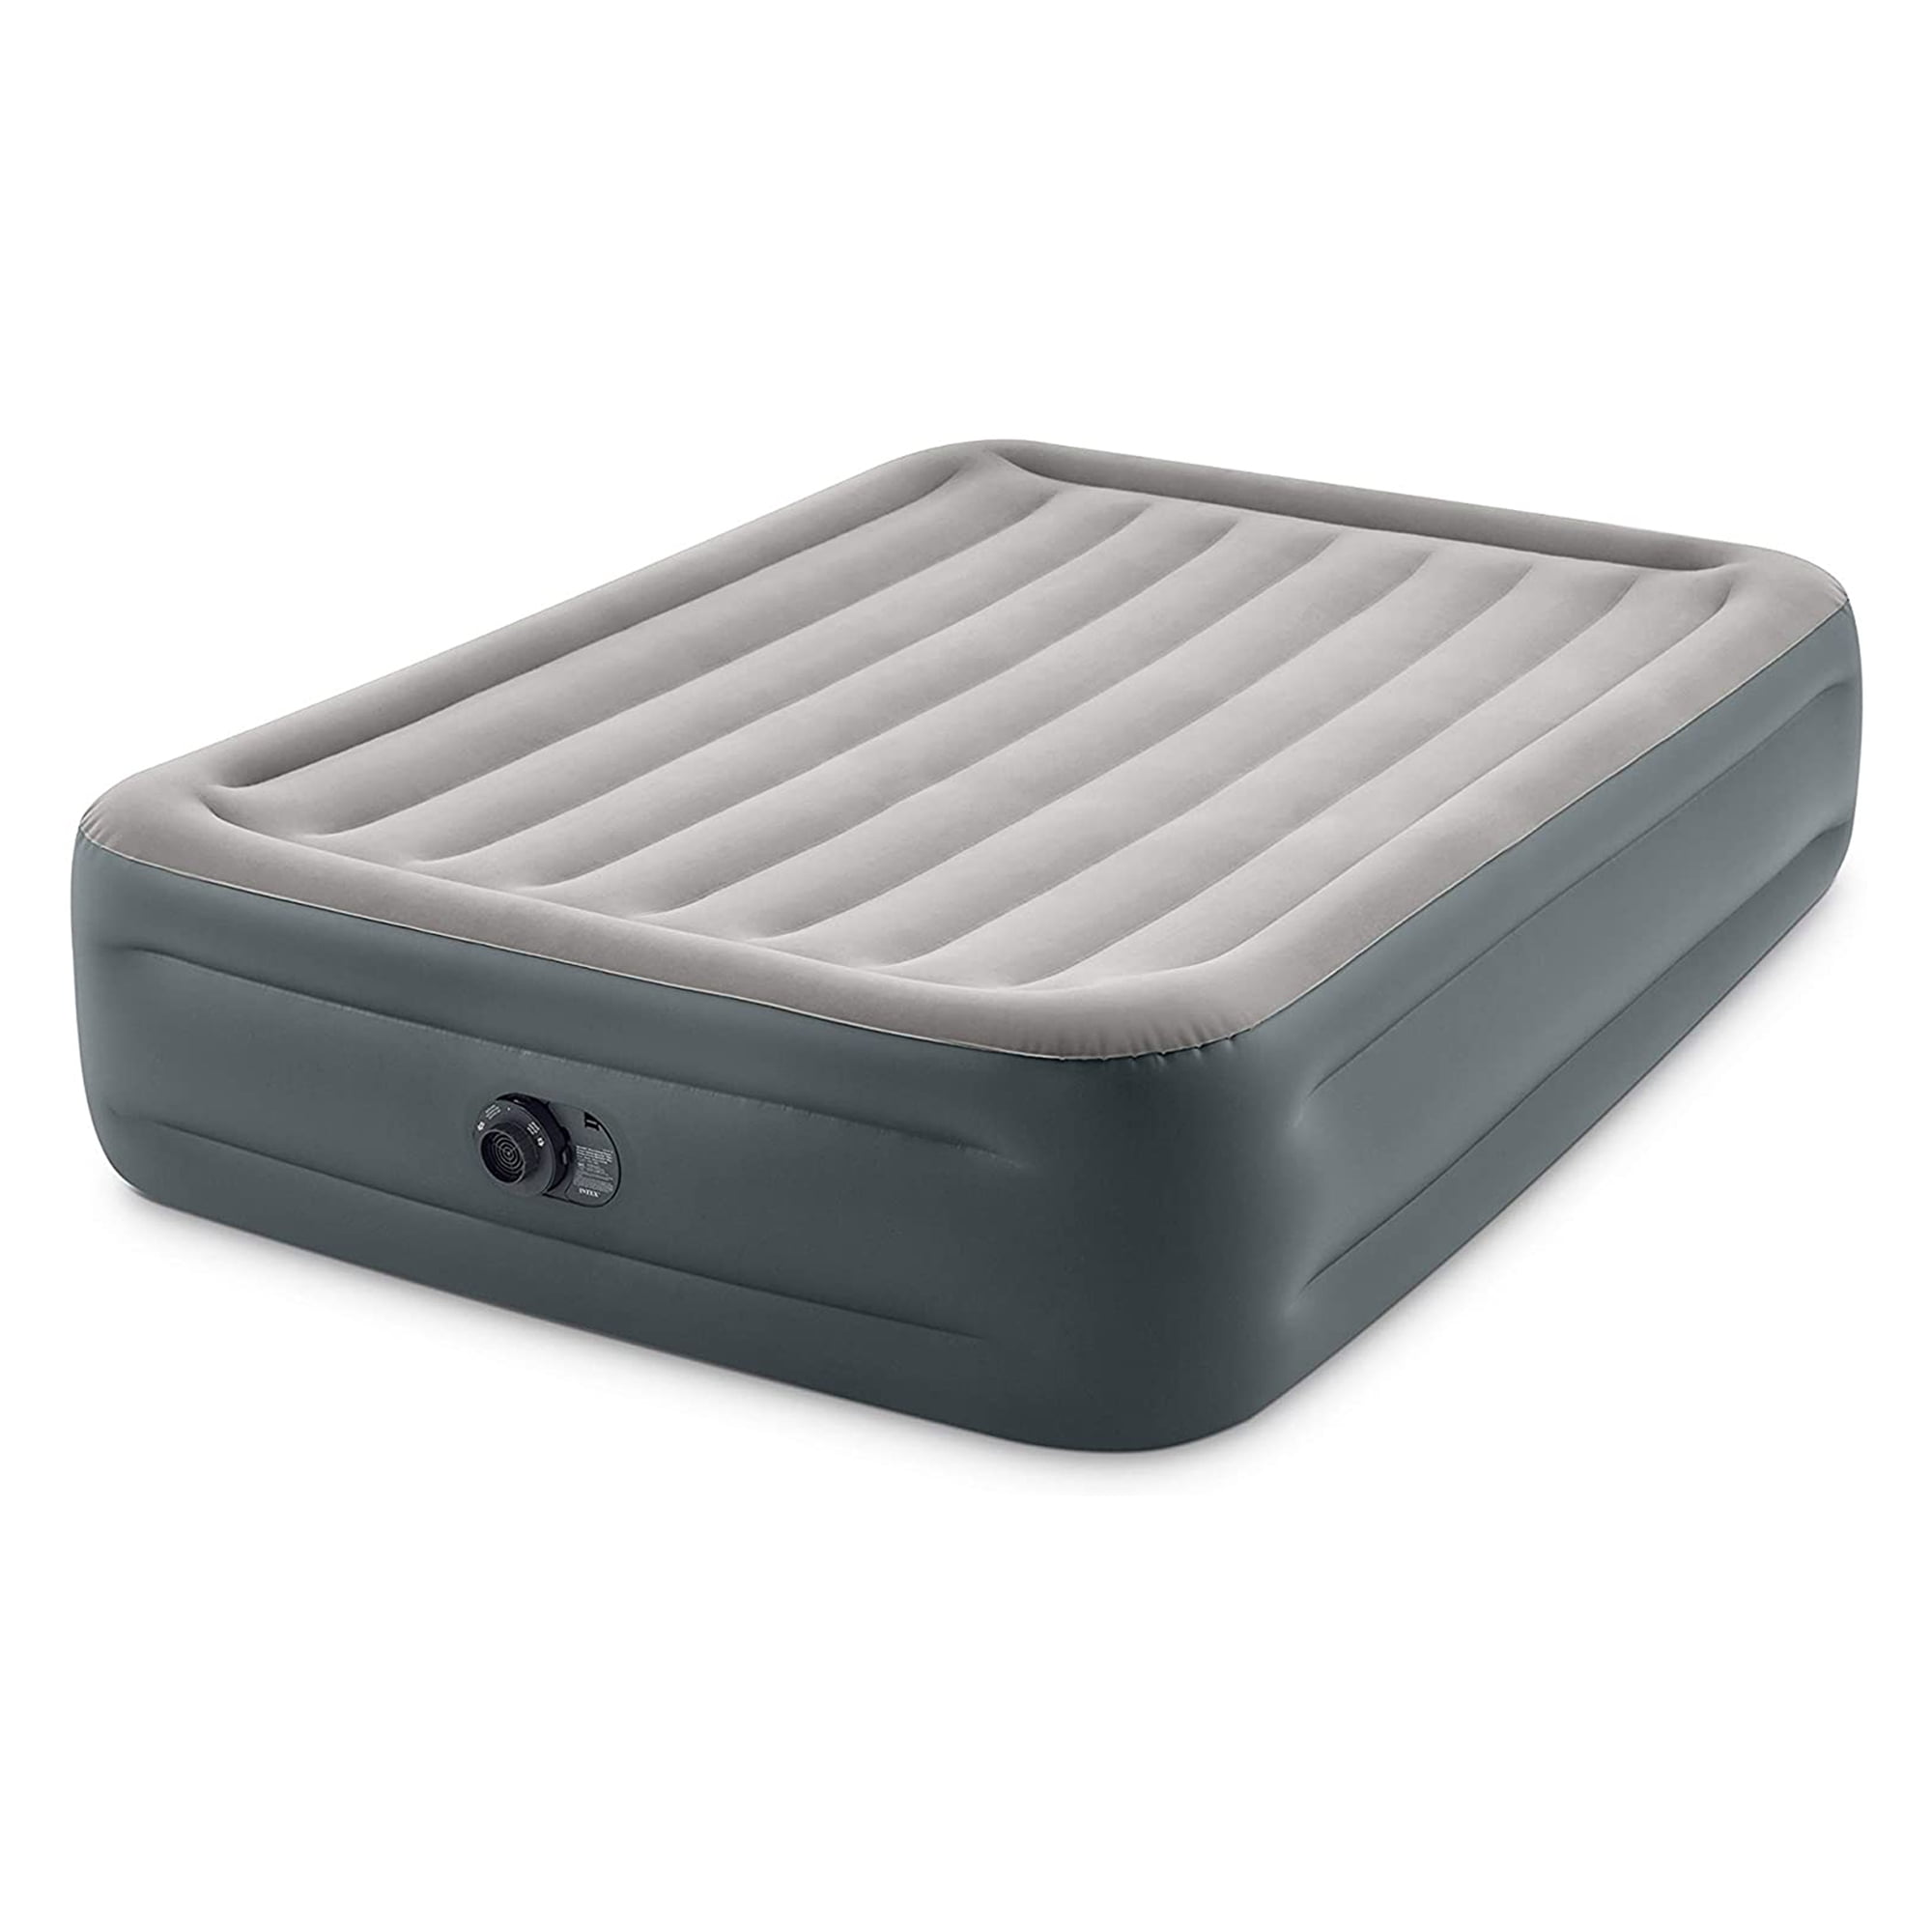 Twin Intex Dura Beam Plus Pillow Raised Airbed Mattress with Built in Pump 